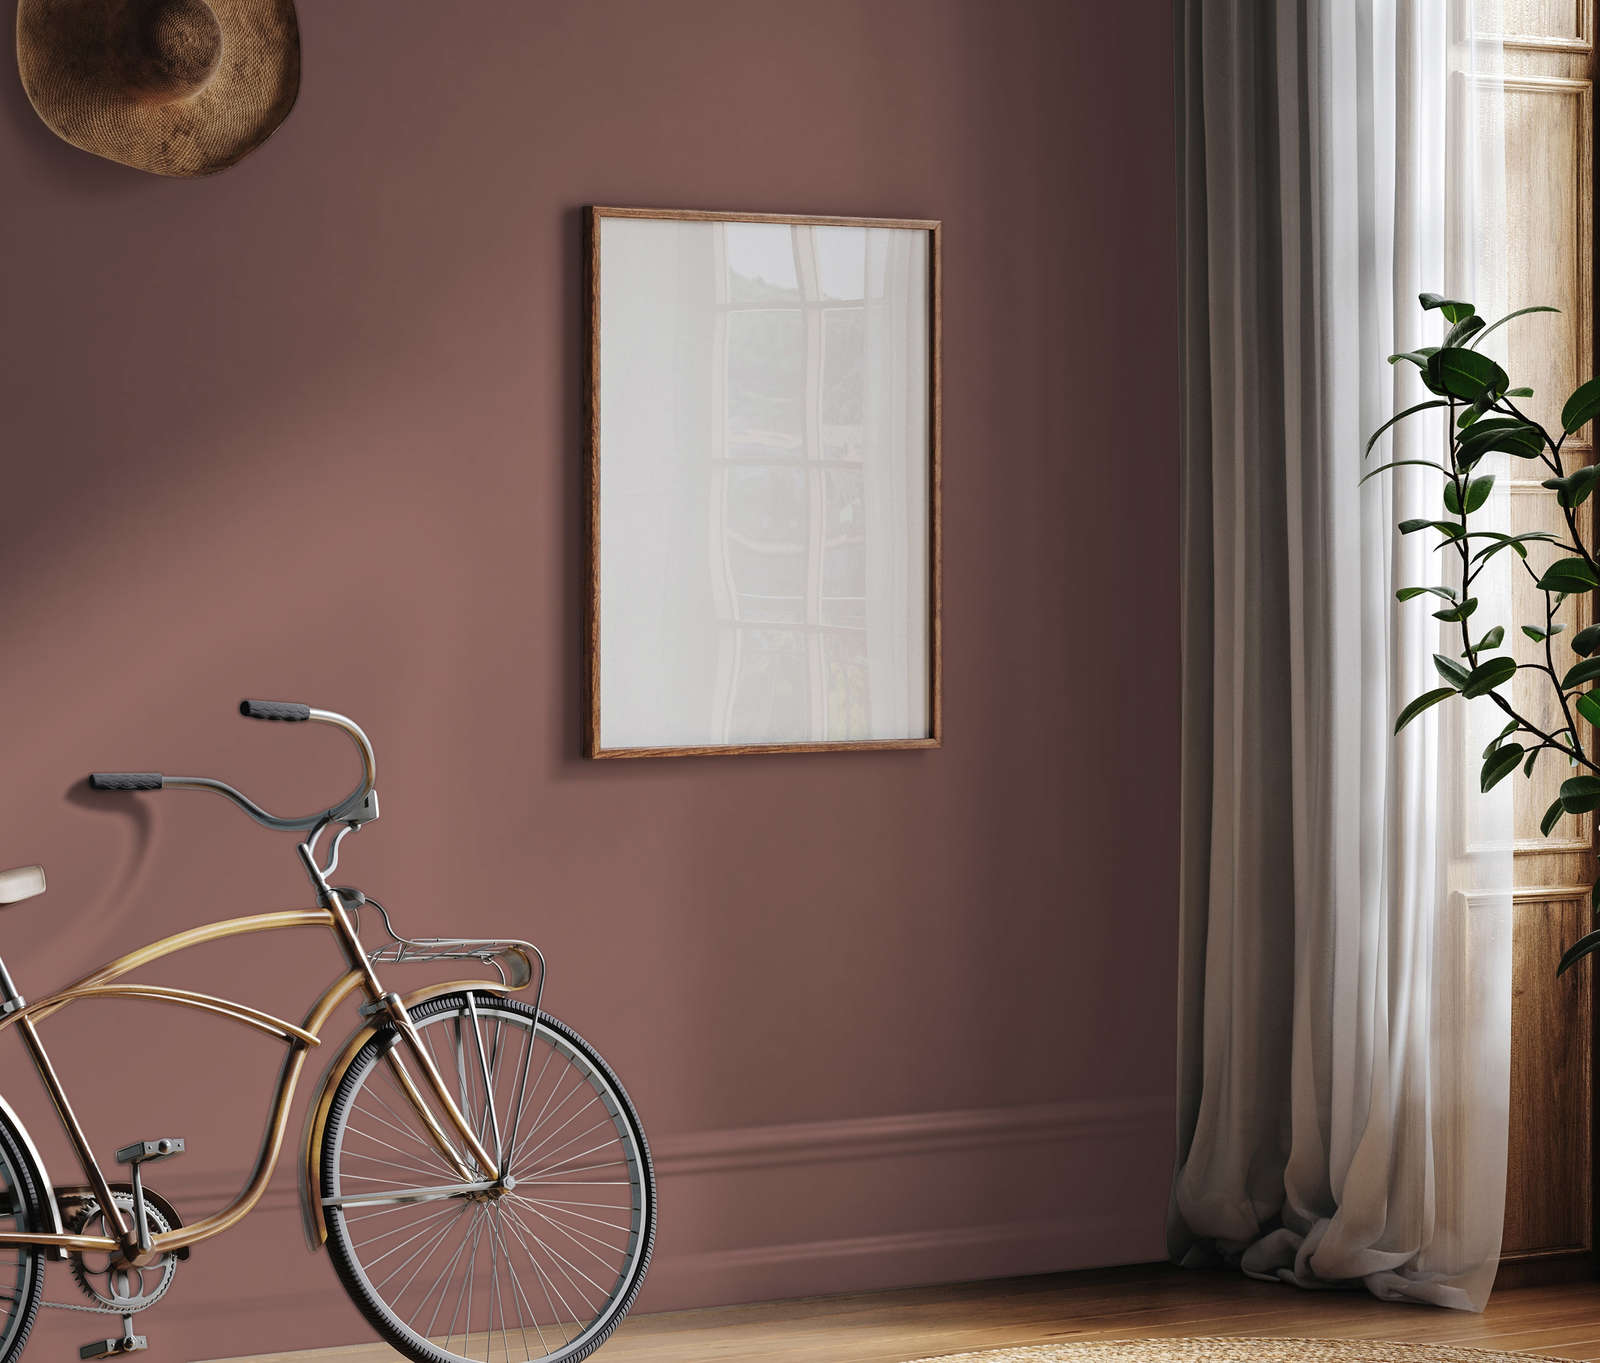             Premium Wall Paint Nature Dark Pink »Natural Nude« NW1012 – 2.5 litre
        